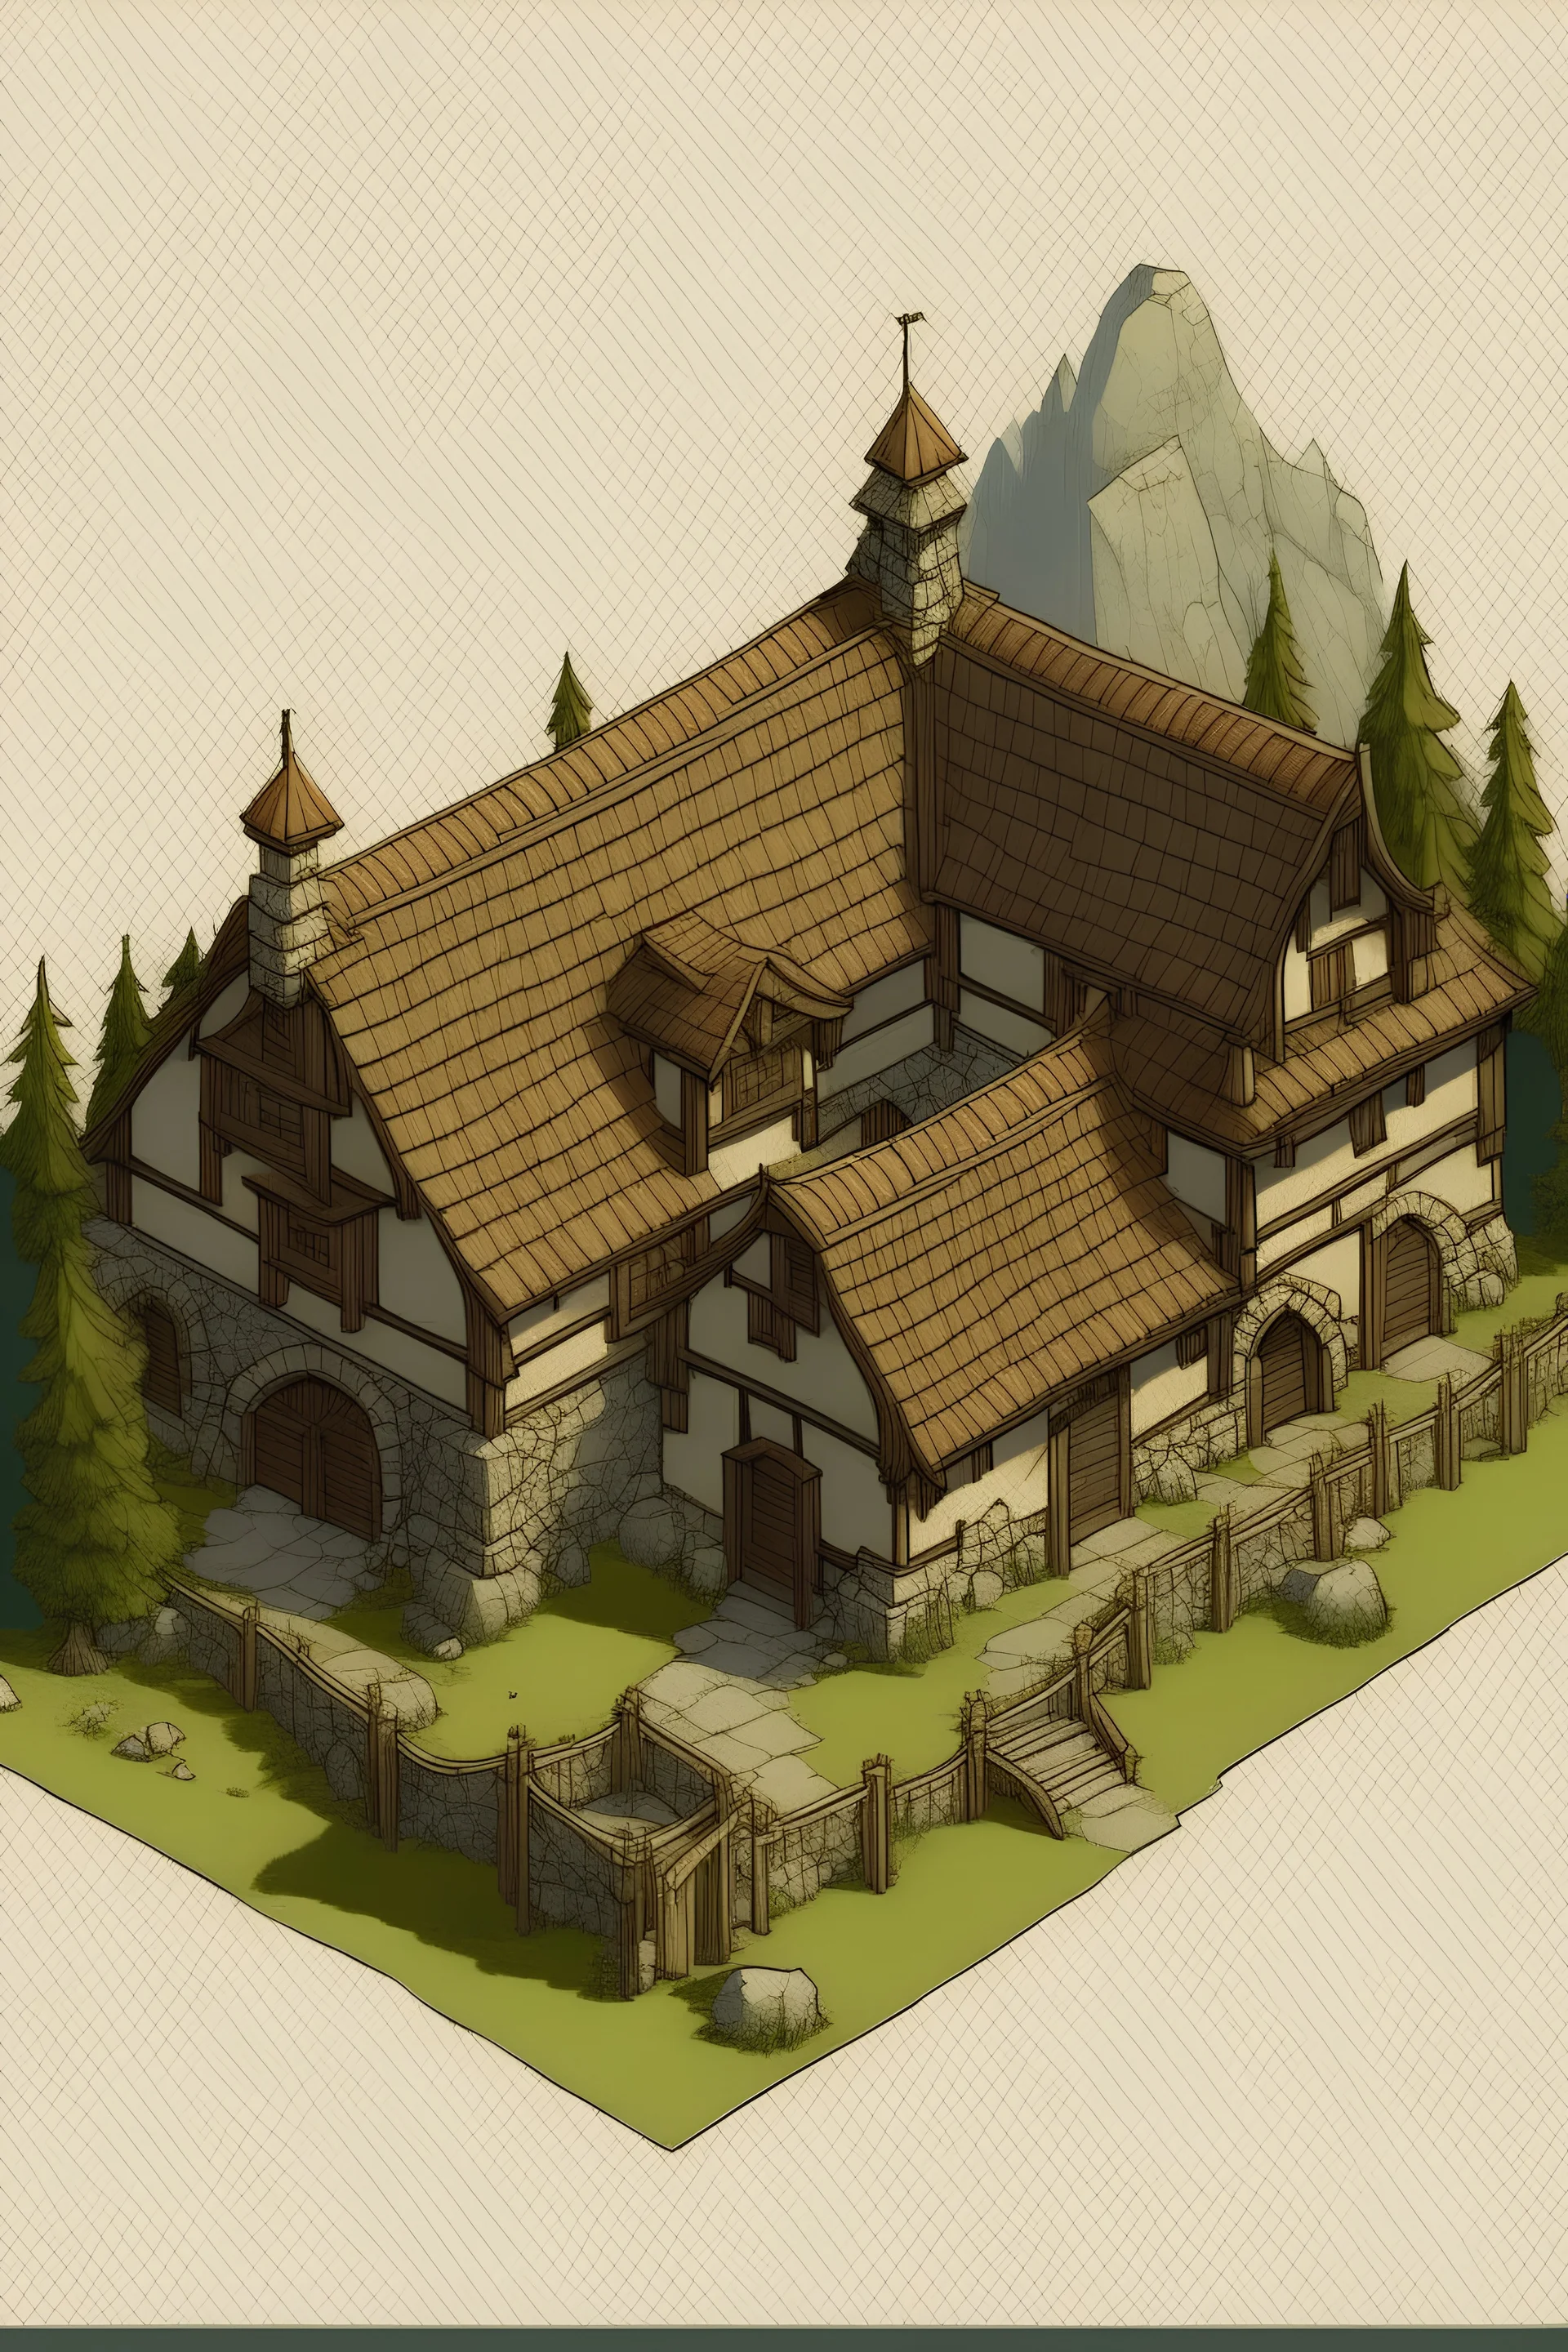 A plan to RPG a single-room, one-story building. Set in a medieval atmosphere amidst mountain scenery.